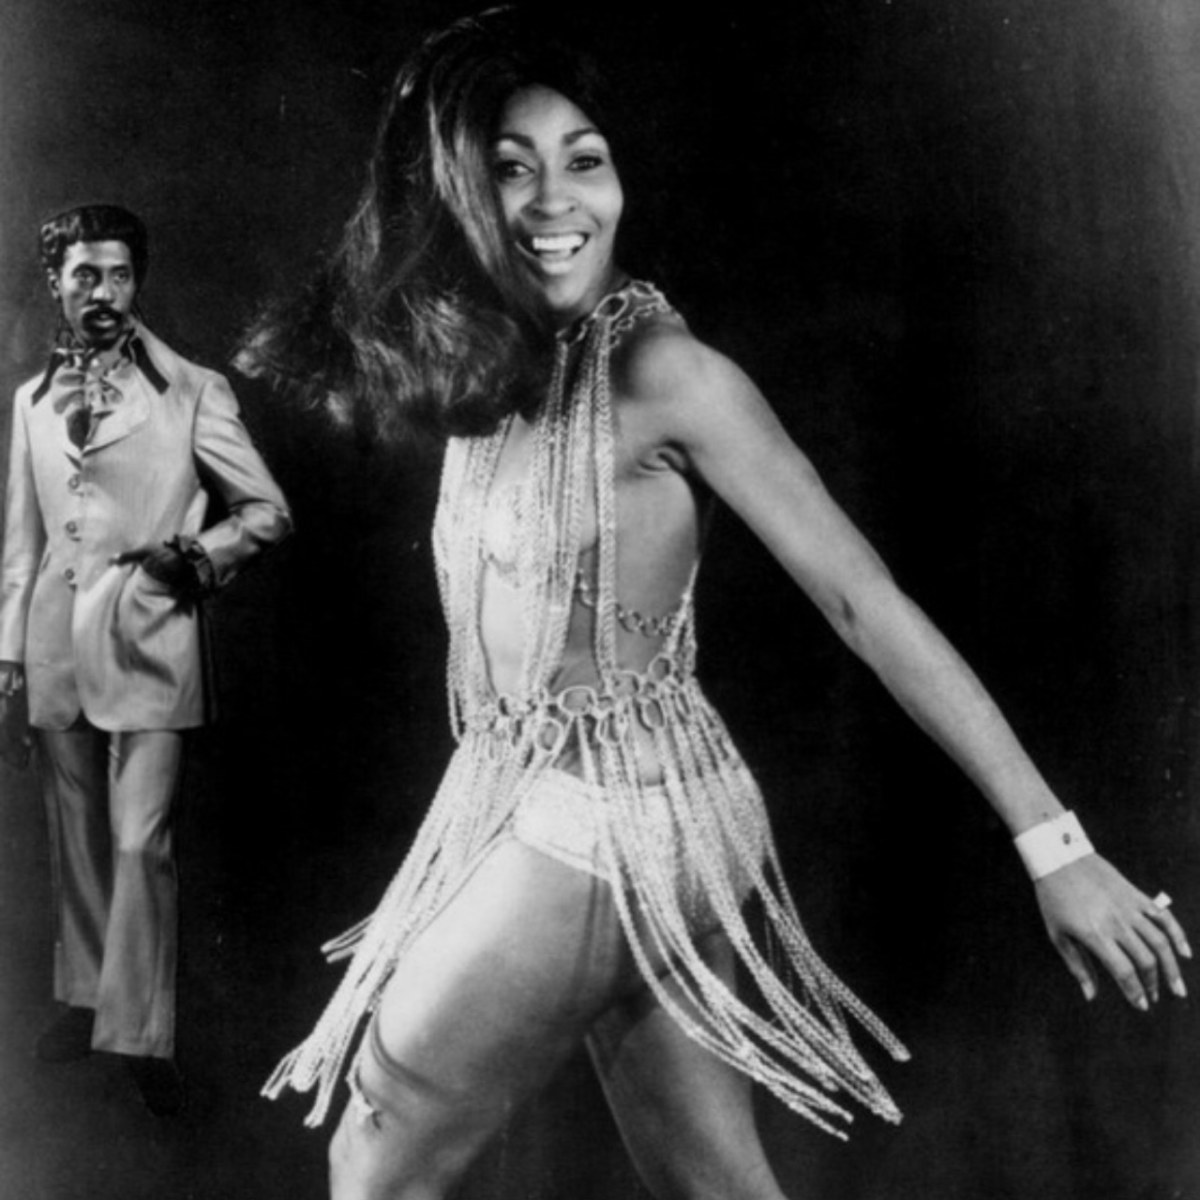 Tina Turner at the beginning of her career